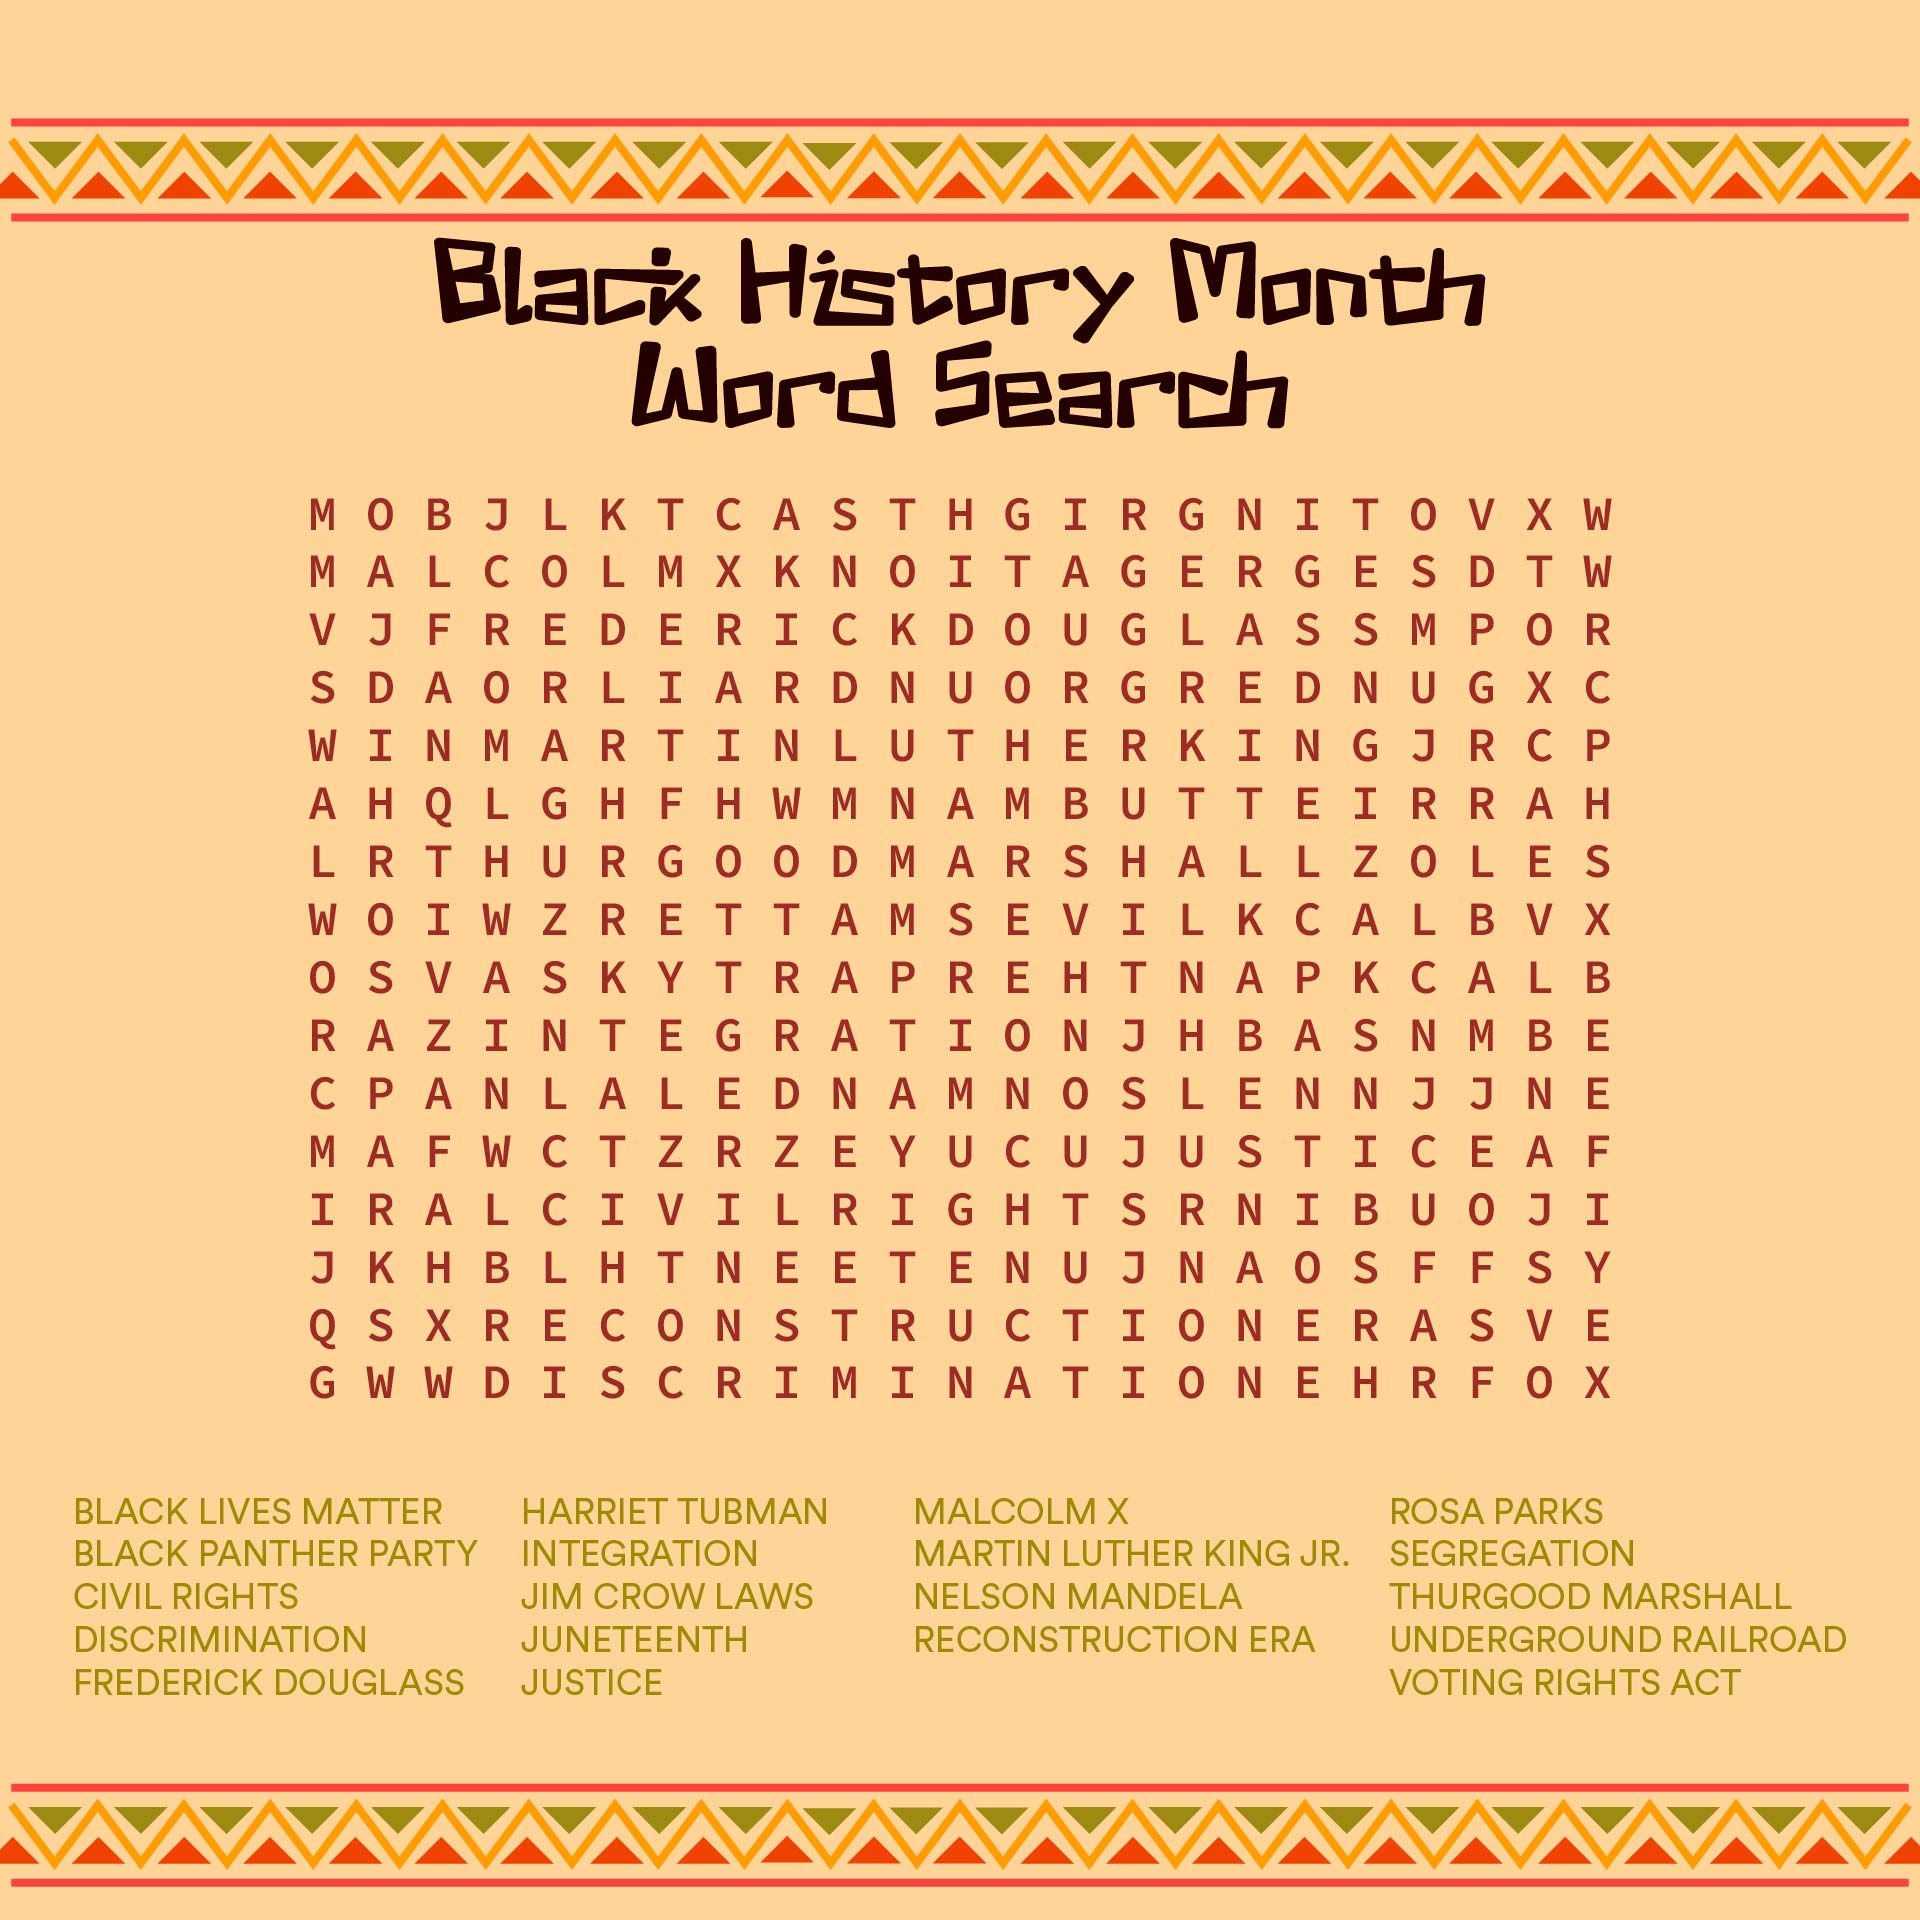 History Word Search Puzzles Printable